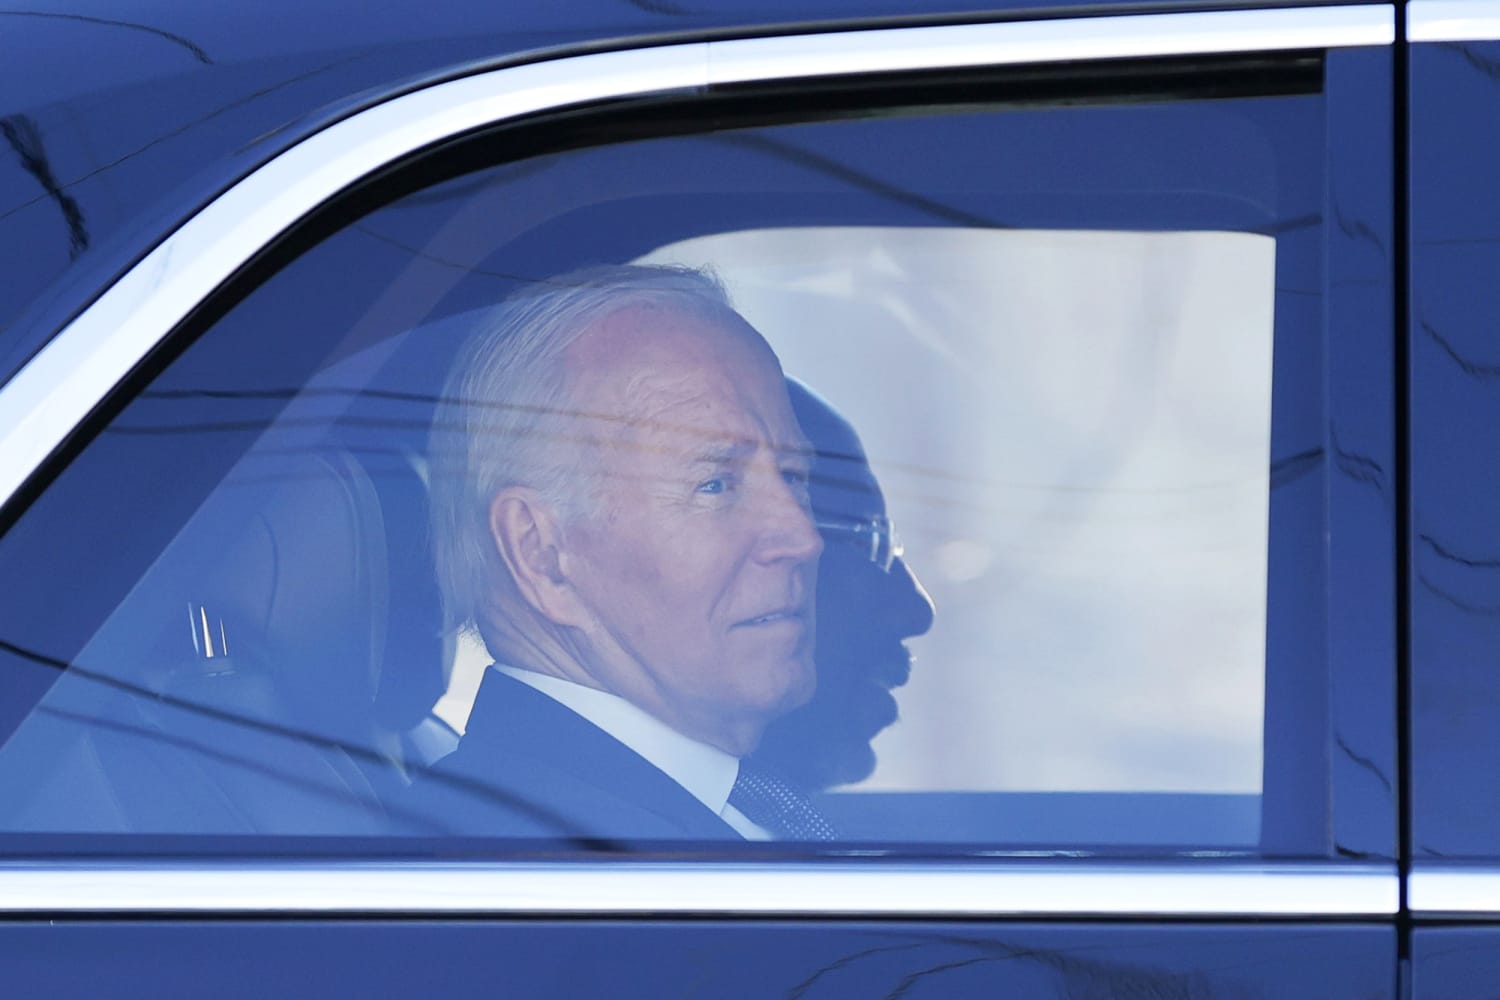 White House says no visitors logs for Biden's Delaware home